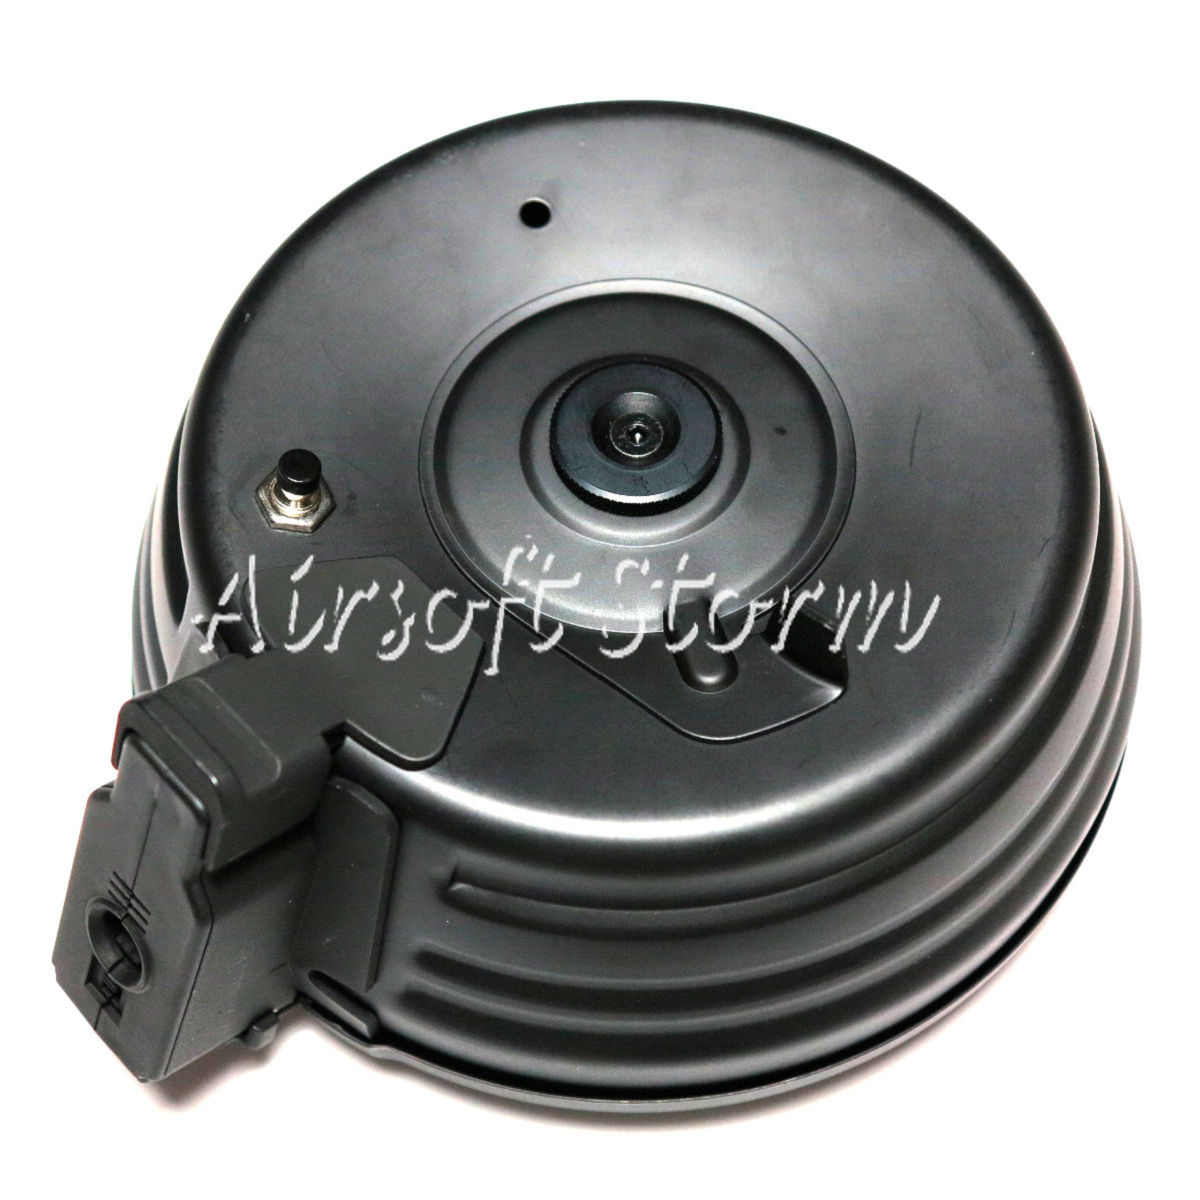 AEG Airsoft Shooting Gear CYMA 2500rd Sound Control Electric Drum Magazine for AEG - Click Image to Close